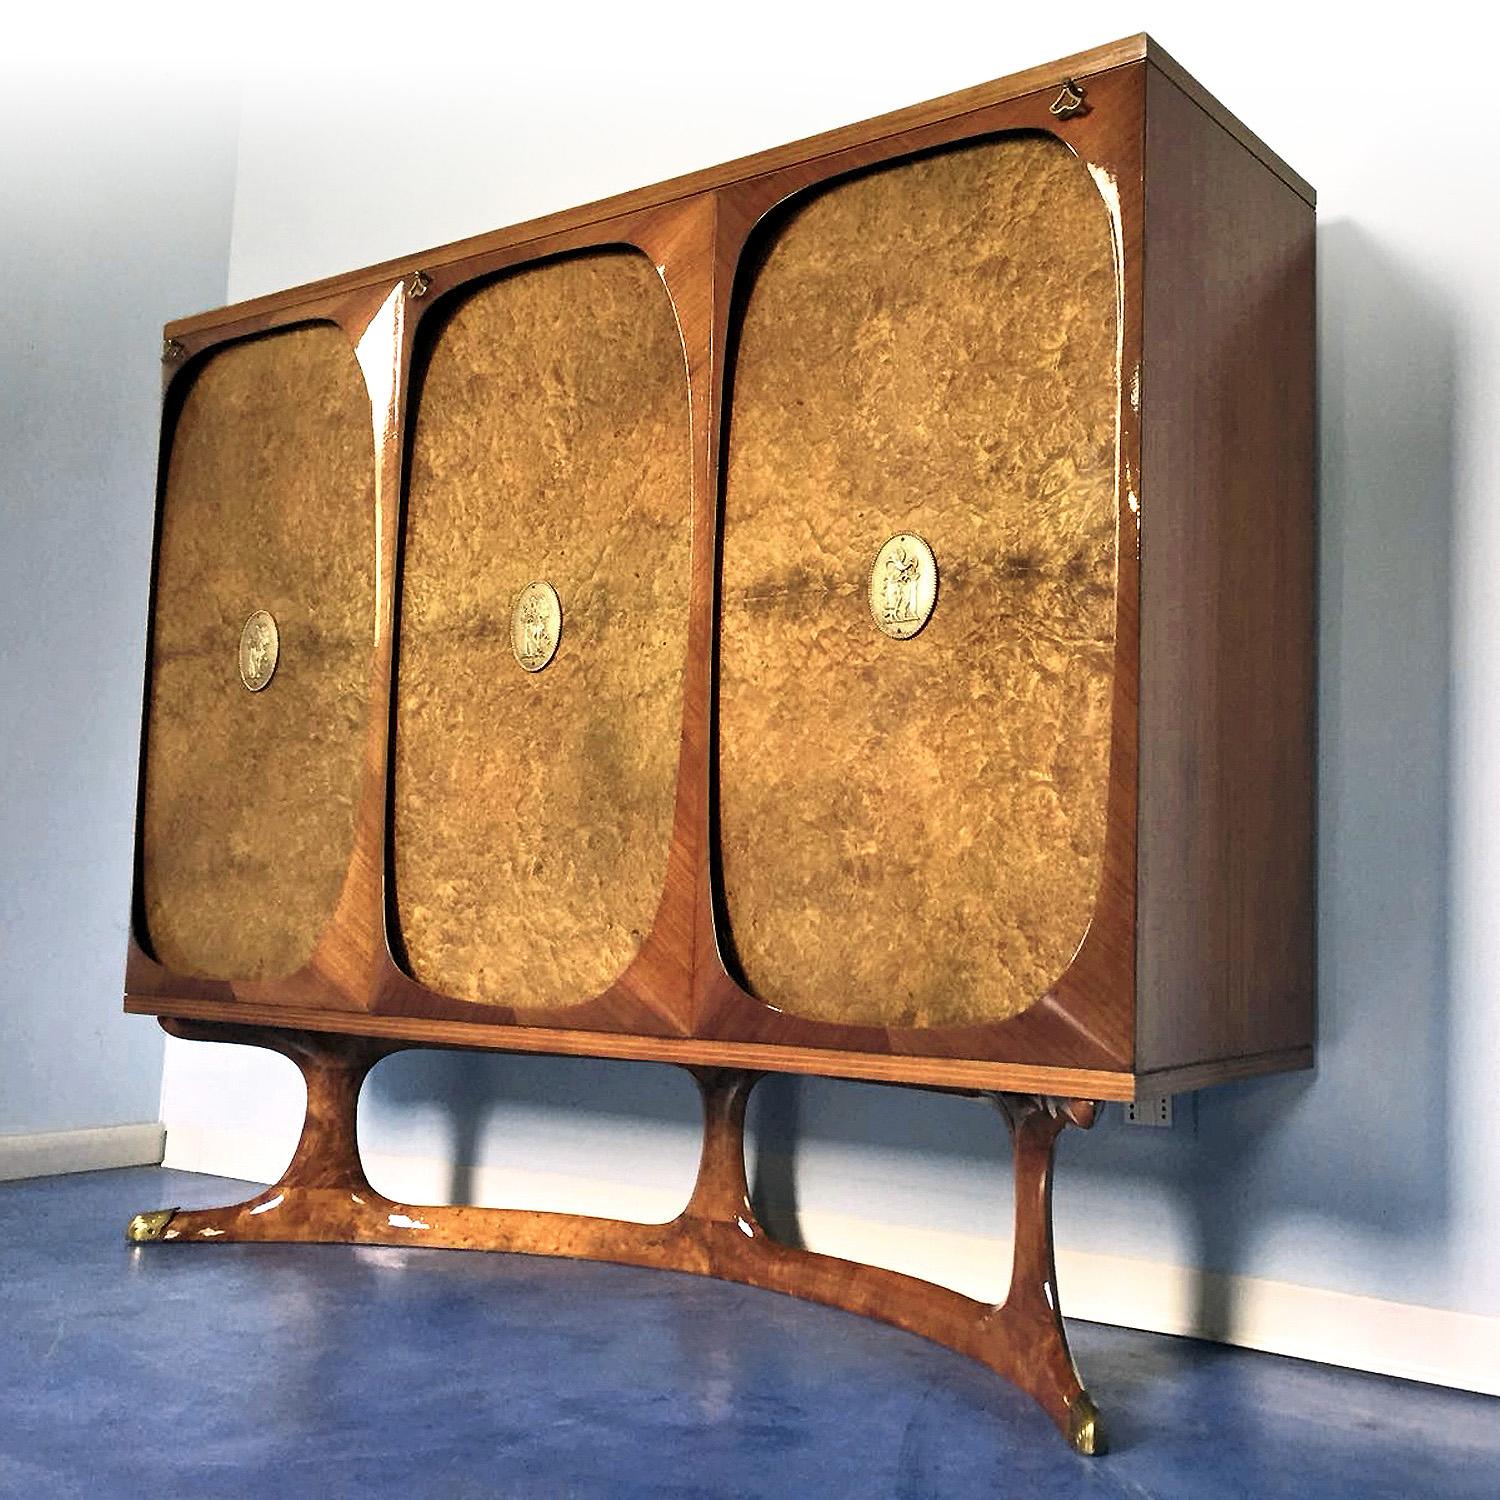 Very rare and fine Italian dining set composed by two sideboards, designed by Vittorio Dassi in the 1950s.

Both items have been manufactured with precious birch briar root and finished with brass details, and both have the basements characterized